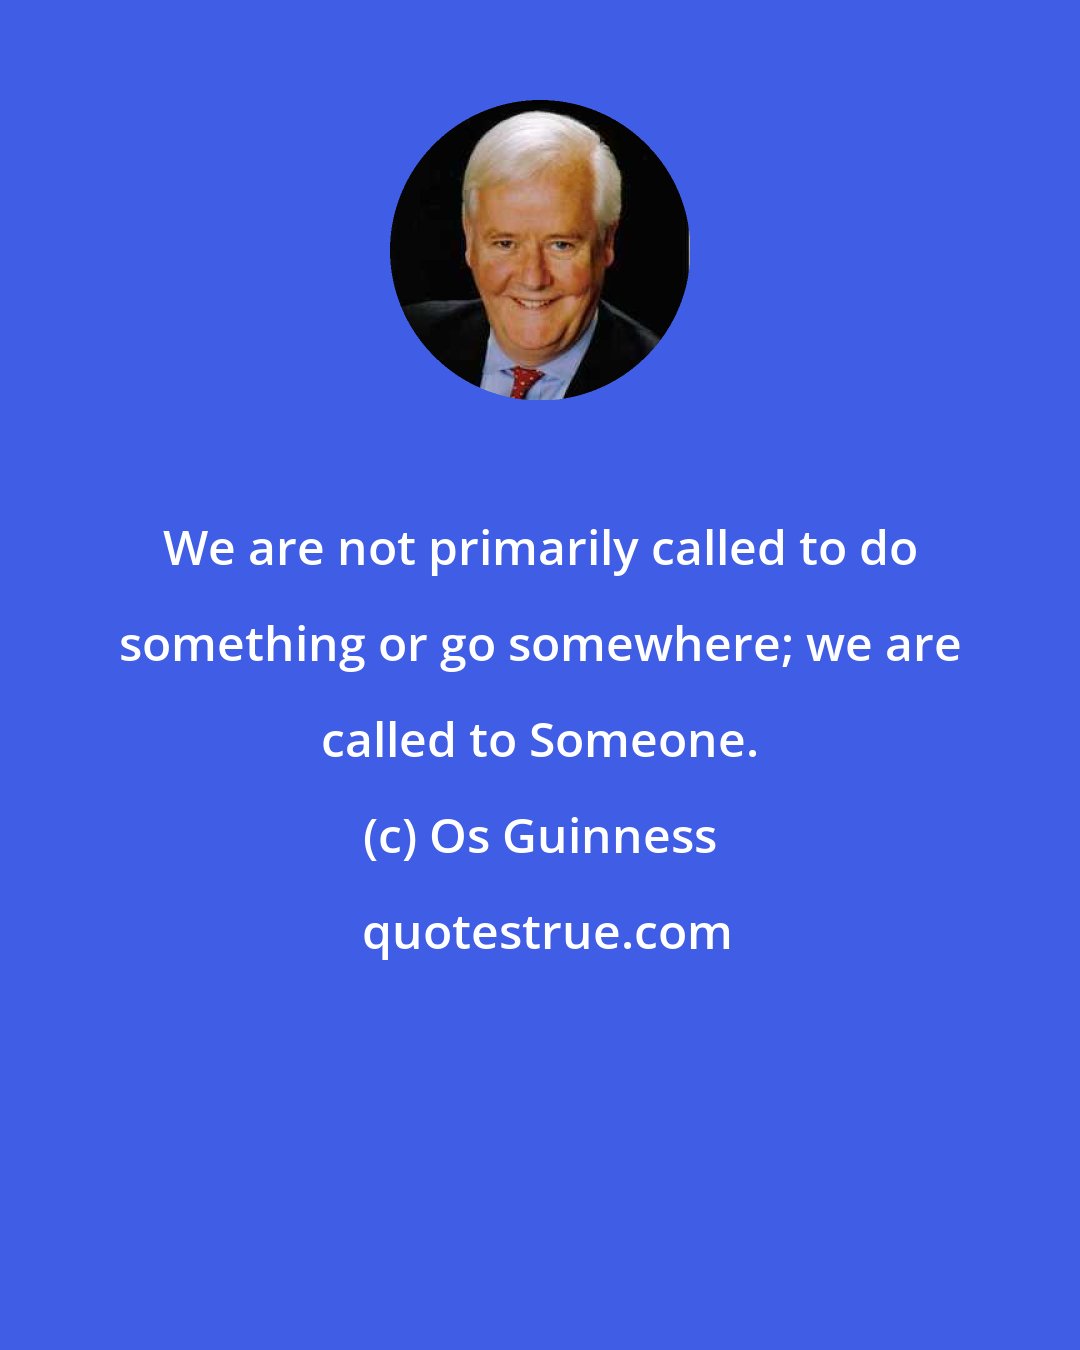 Os Guinness: We are not primarily called to do something or go somewhere; we are called to Someone.